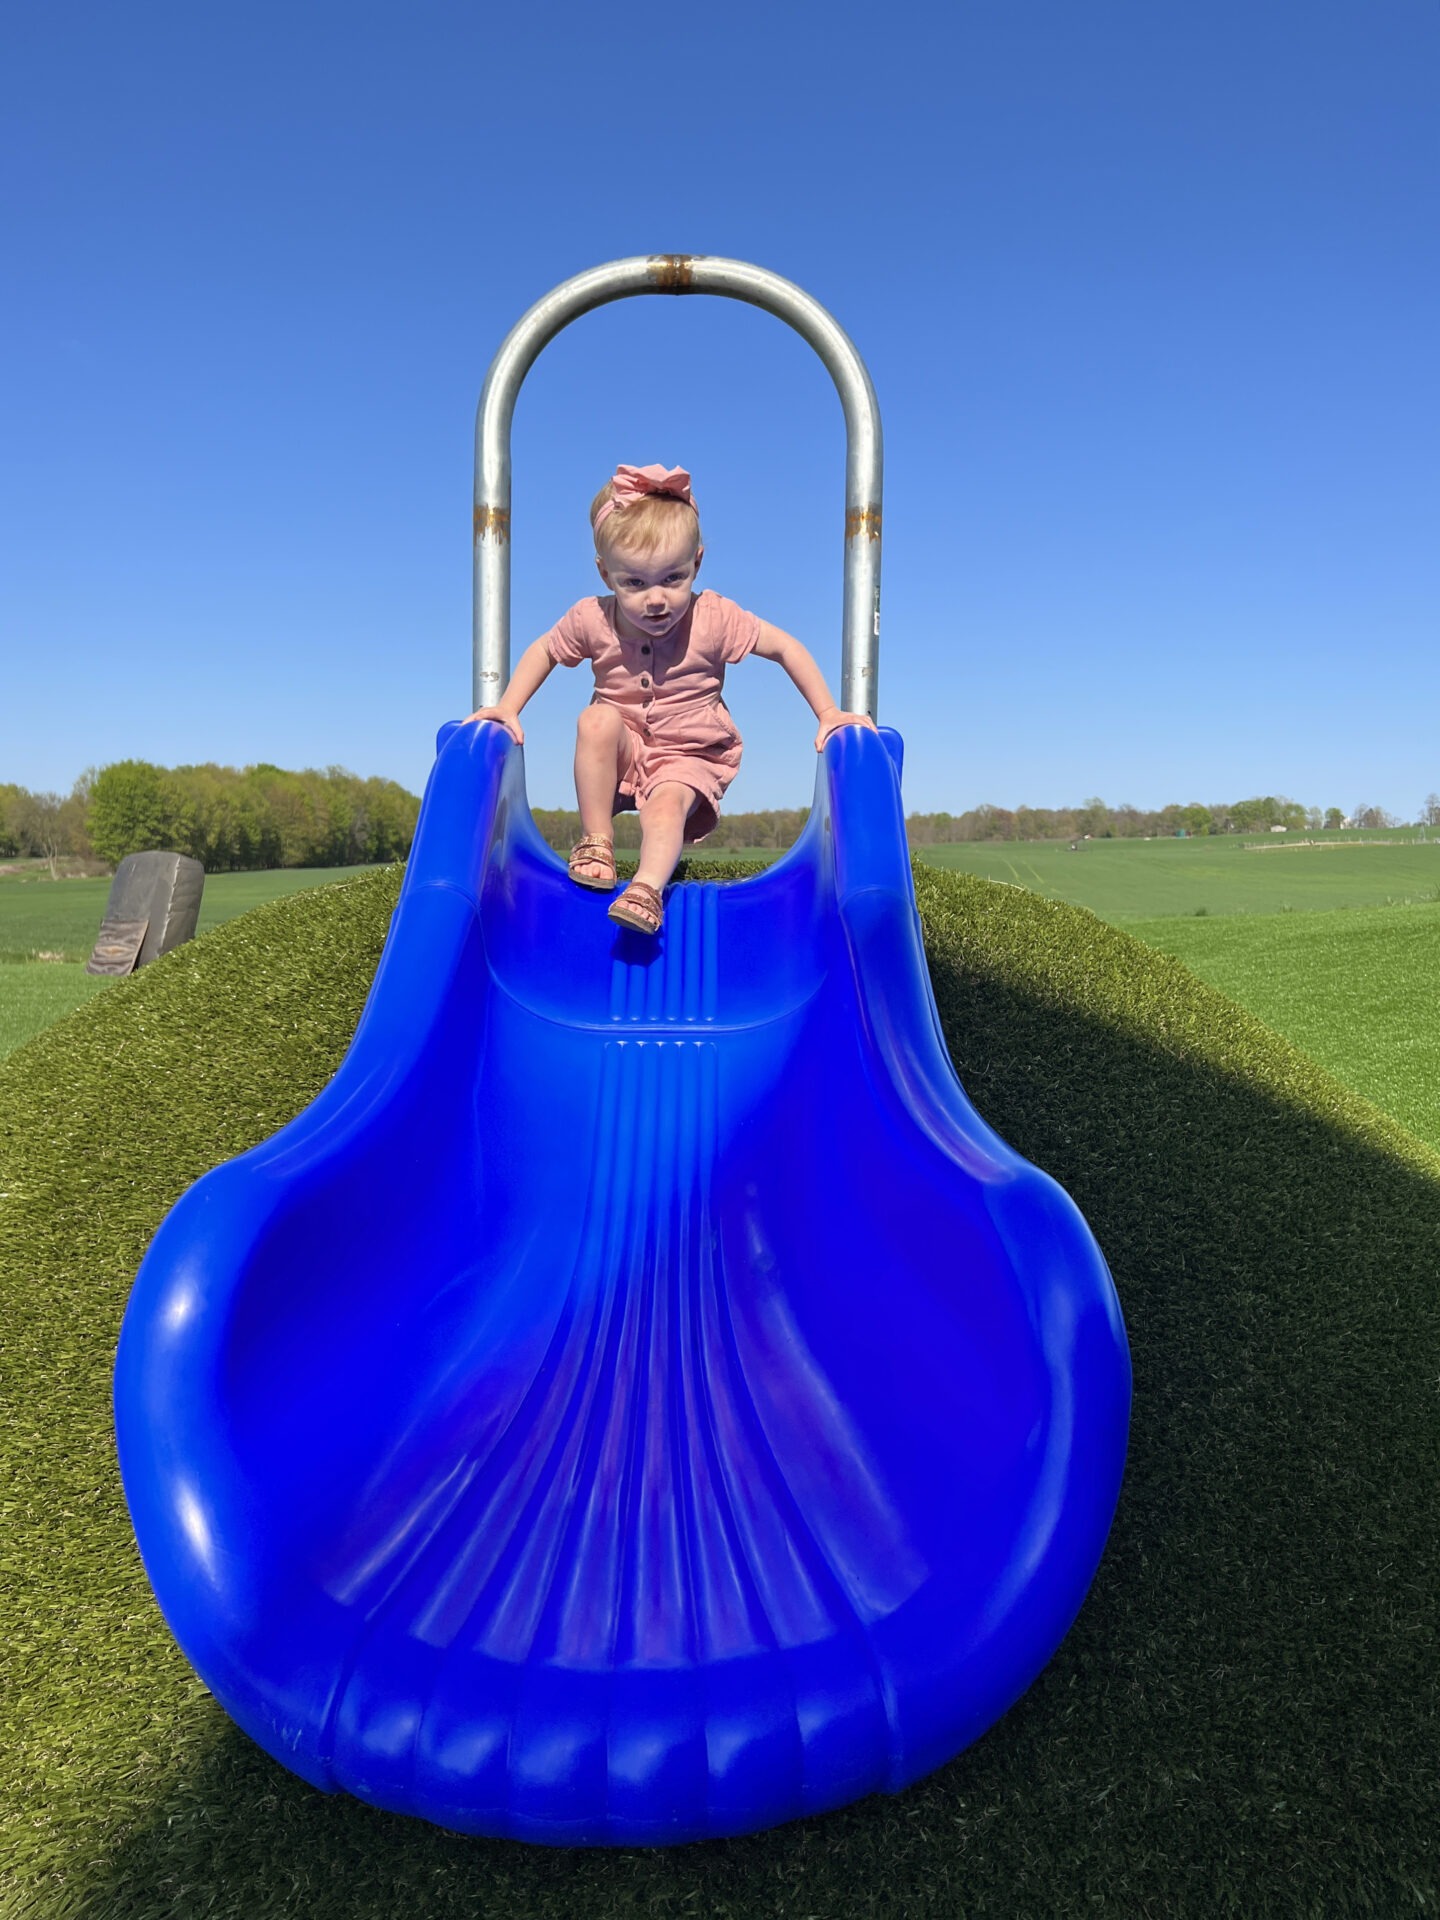 A young child poised at the top of a vibrant blue playground slide, with clear blue skies and open green fields in the background.